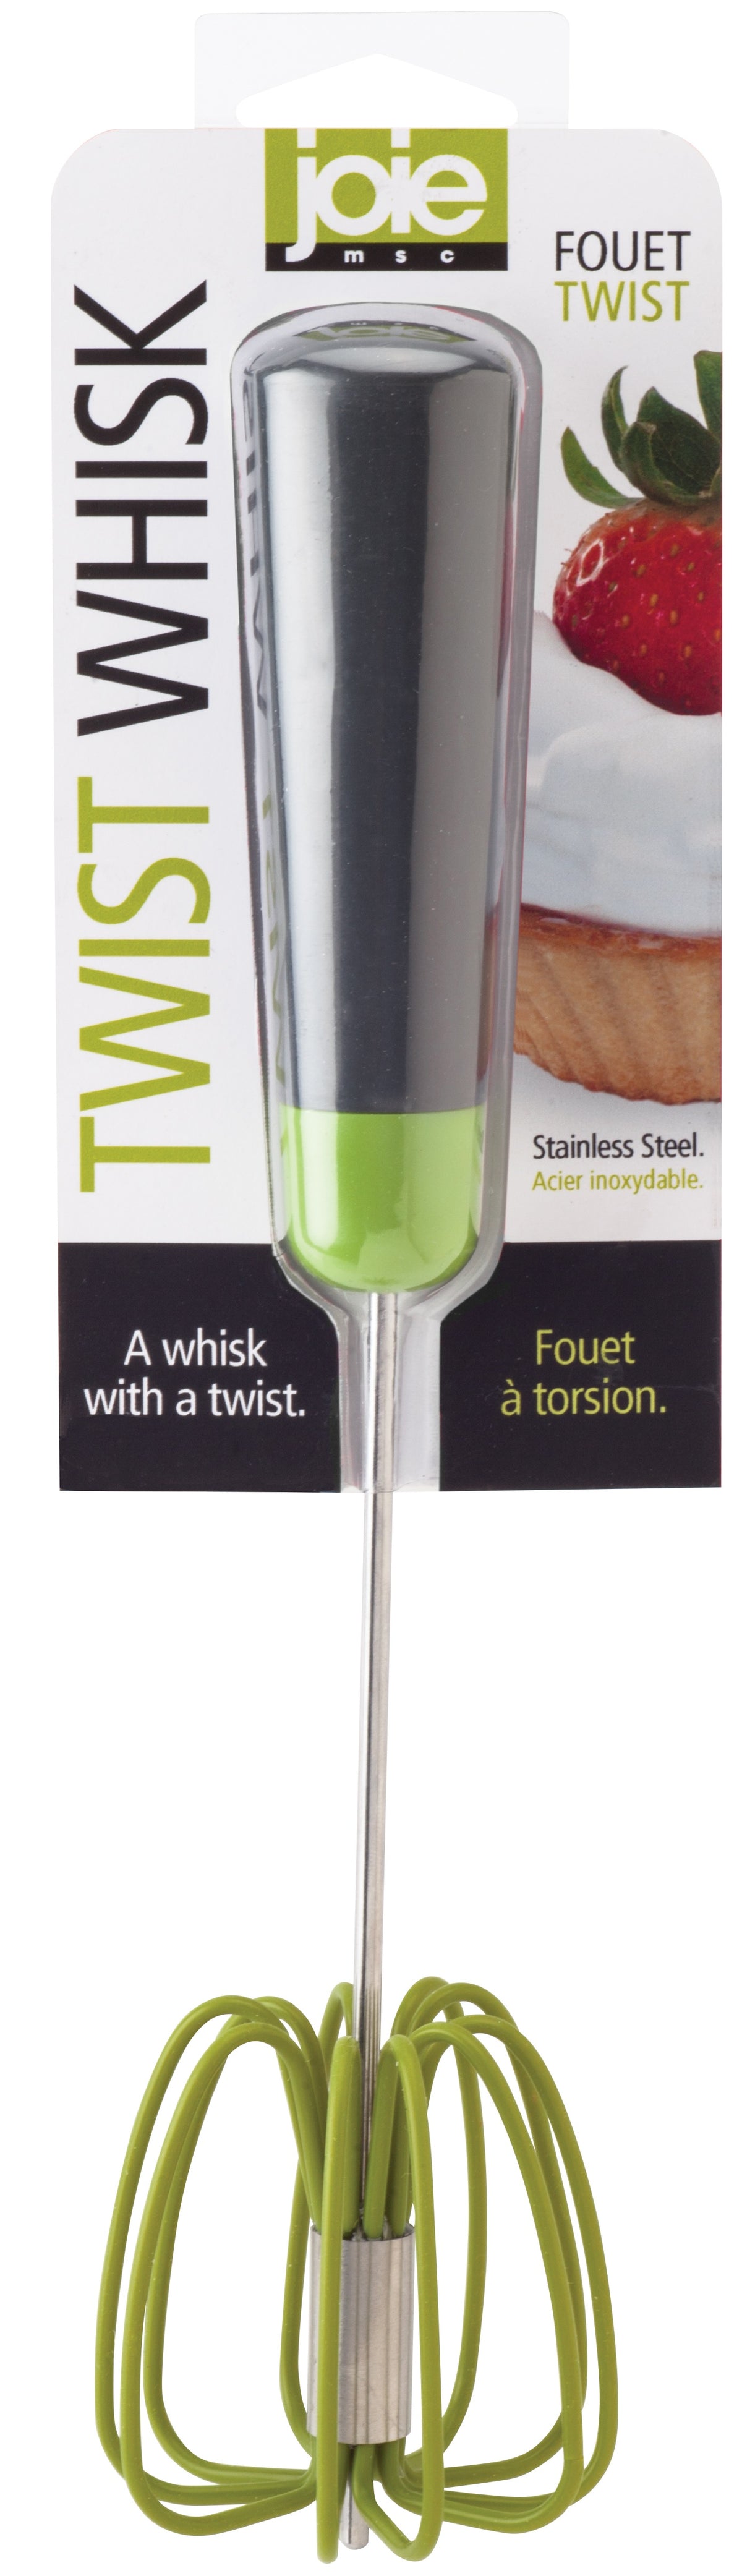 Joie MSC 42237 Twisk Whisk, Assorted Colors